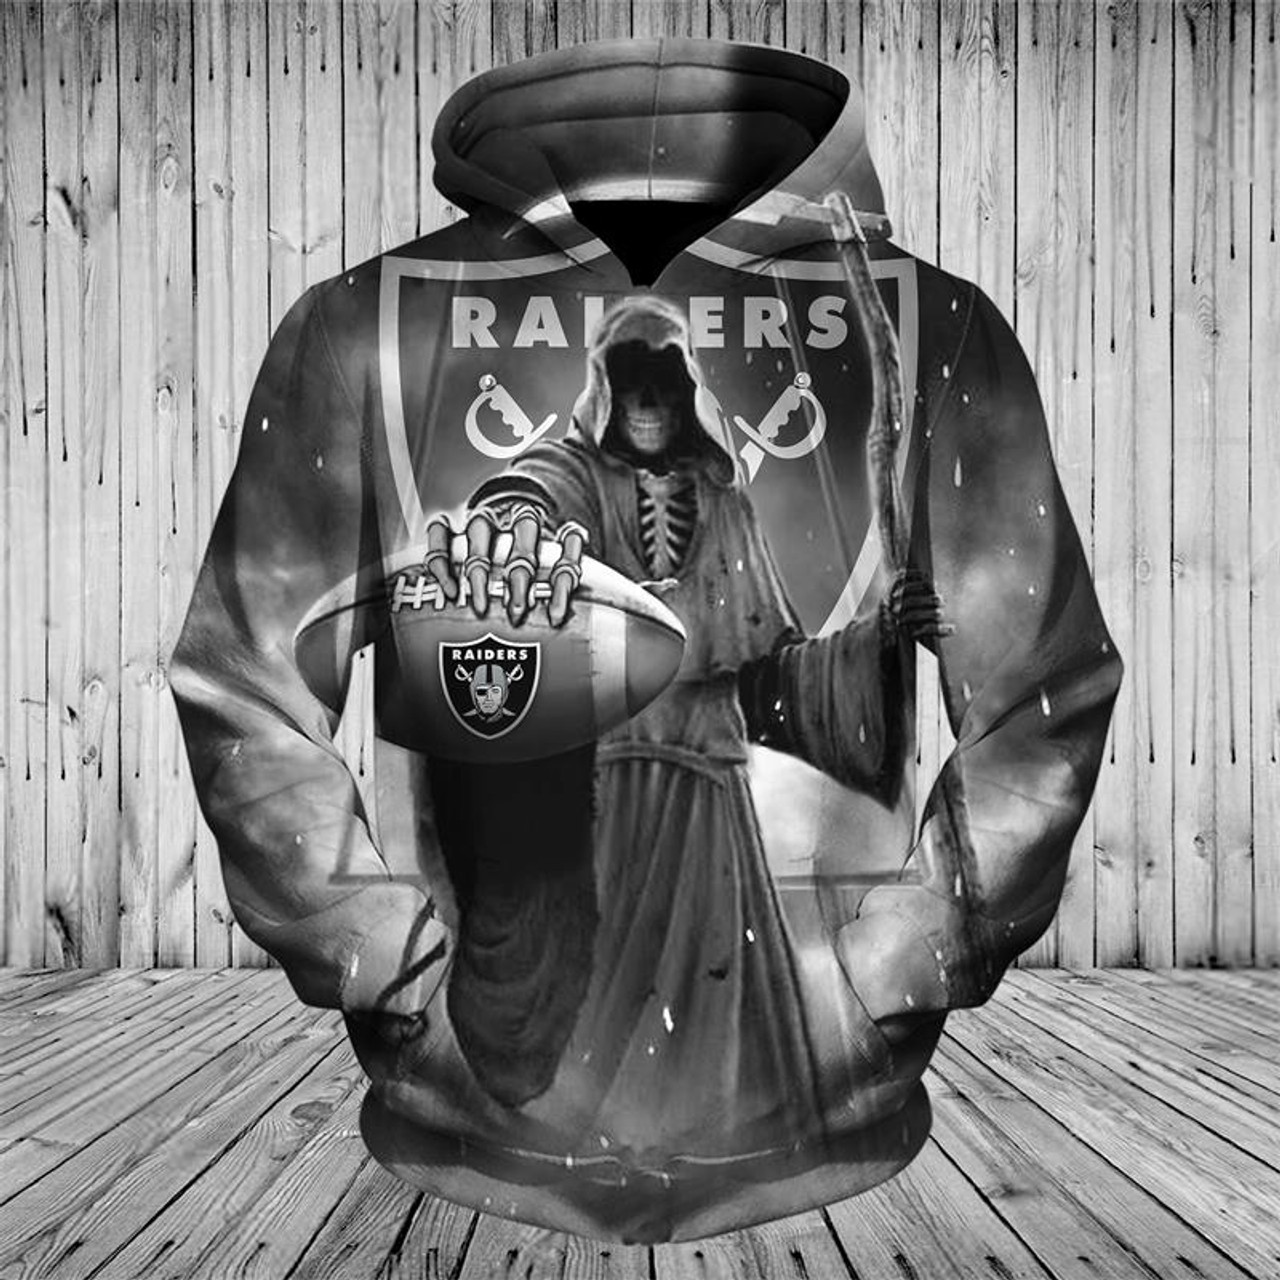  **(OFFICIALLY-LICENSED-N.F.L.OAKLAND-RAIDERS-PULLOVER-HOODIES & GRIMM-REAPER-IN-SUDDEN-DEATH-FOOTBALL,NICE-CUSTOM-3D-GRAPHIC-PRINTED-DOUBLE-SIDED-ALL-OVER-DESIGN/RAIDERS-TEAM-FOOTBALL-LOGO,PREMIUM-PULLOVER-POCKET-HOODIES:)**